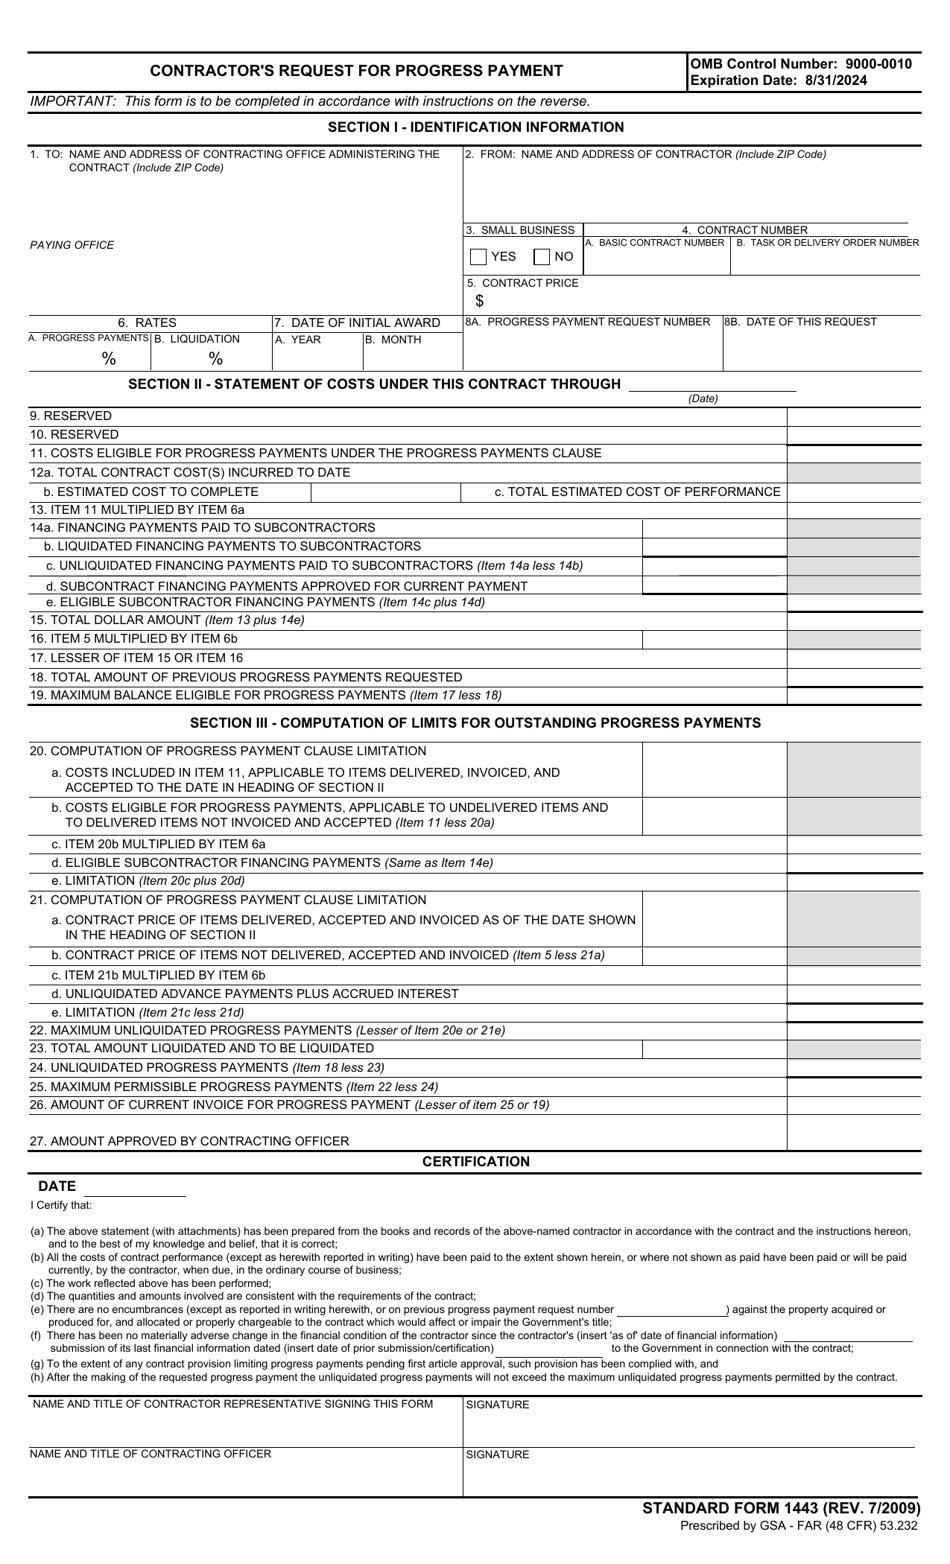 Form SF-1443 Contractors Request for Progress Payment, Page 1